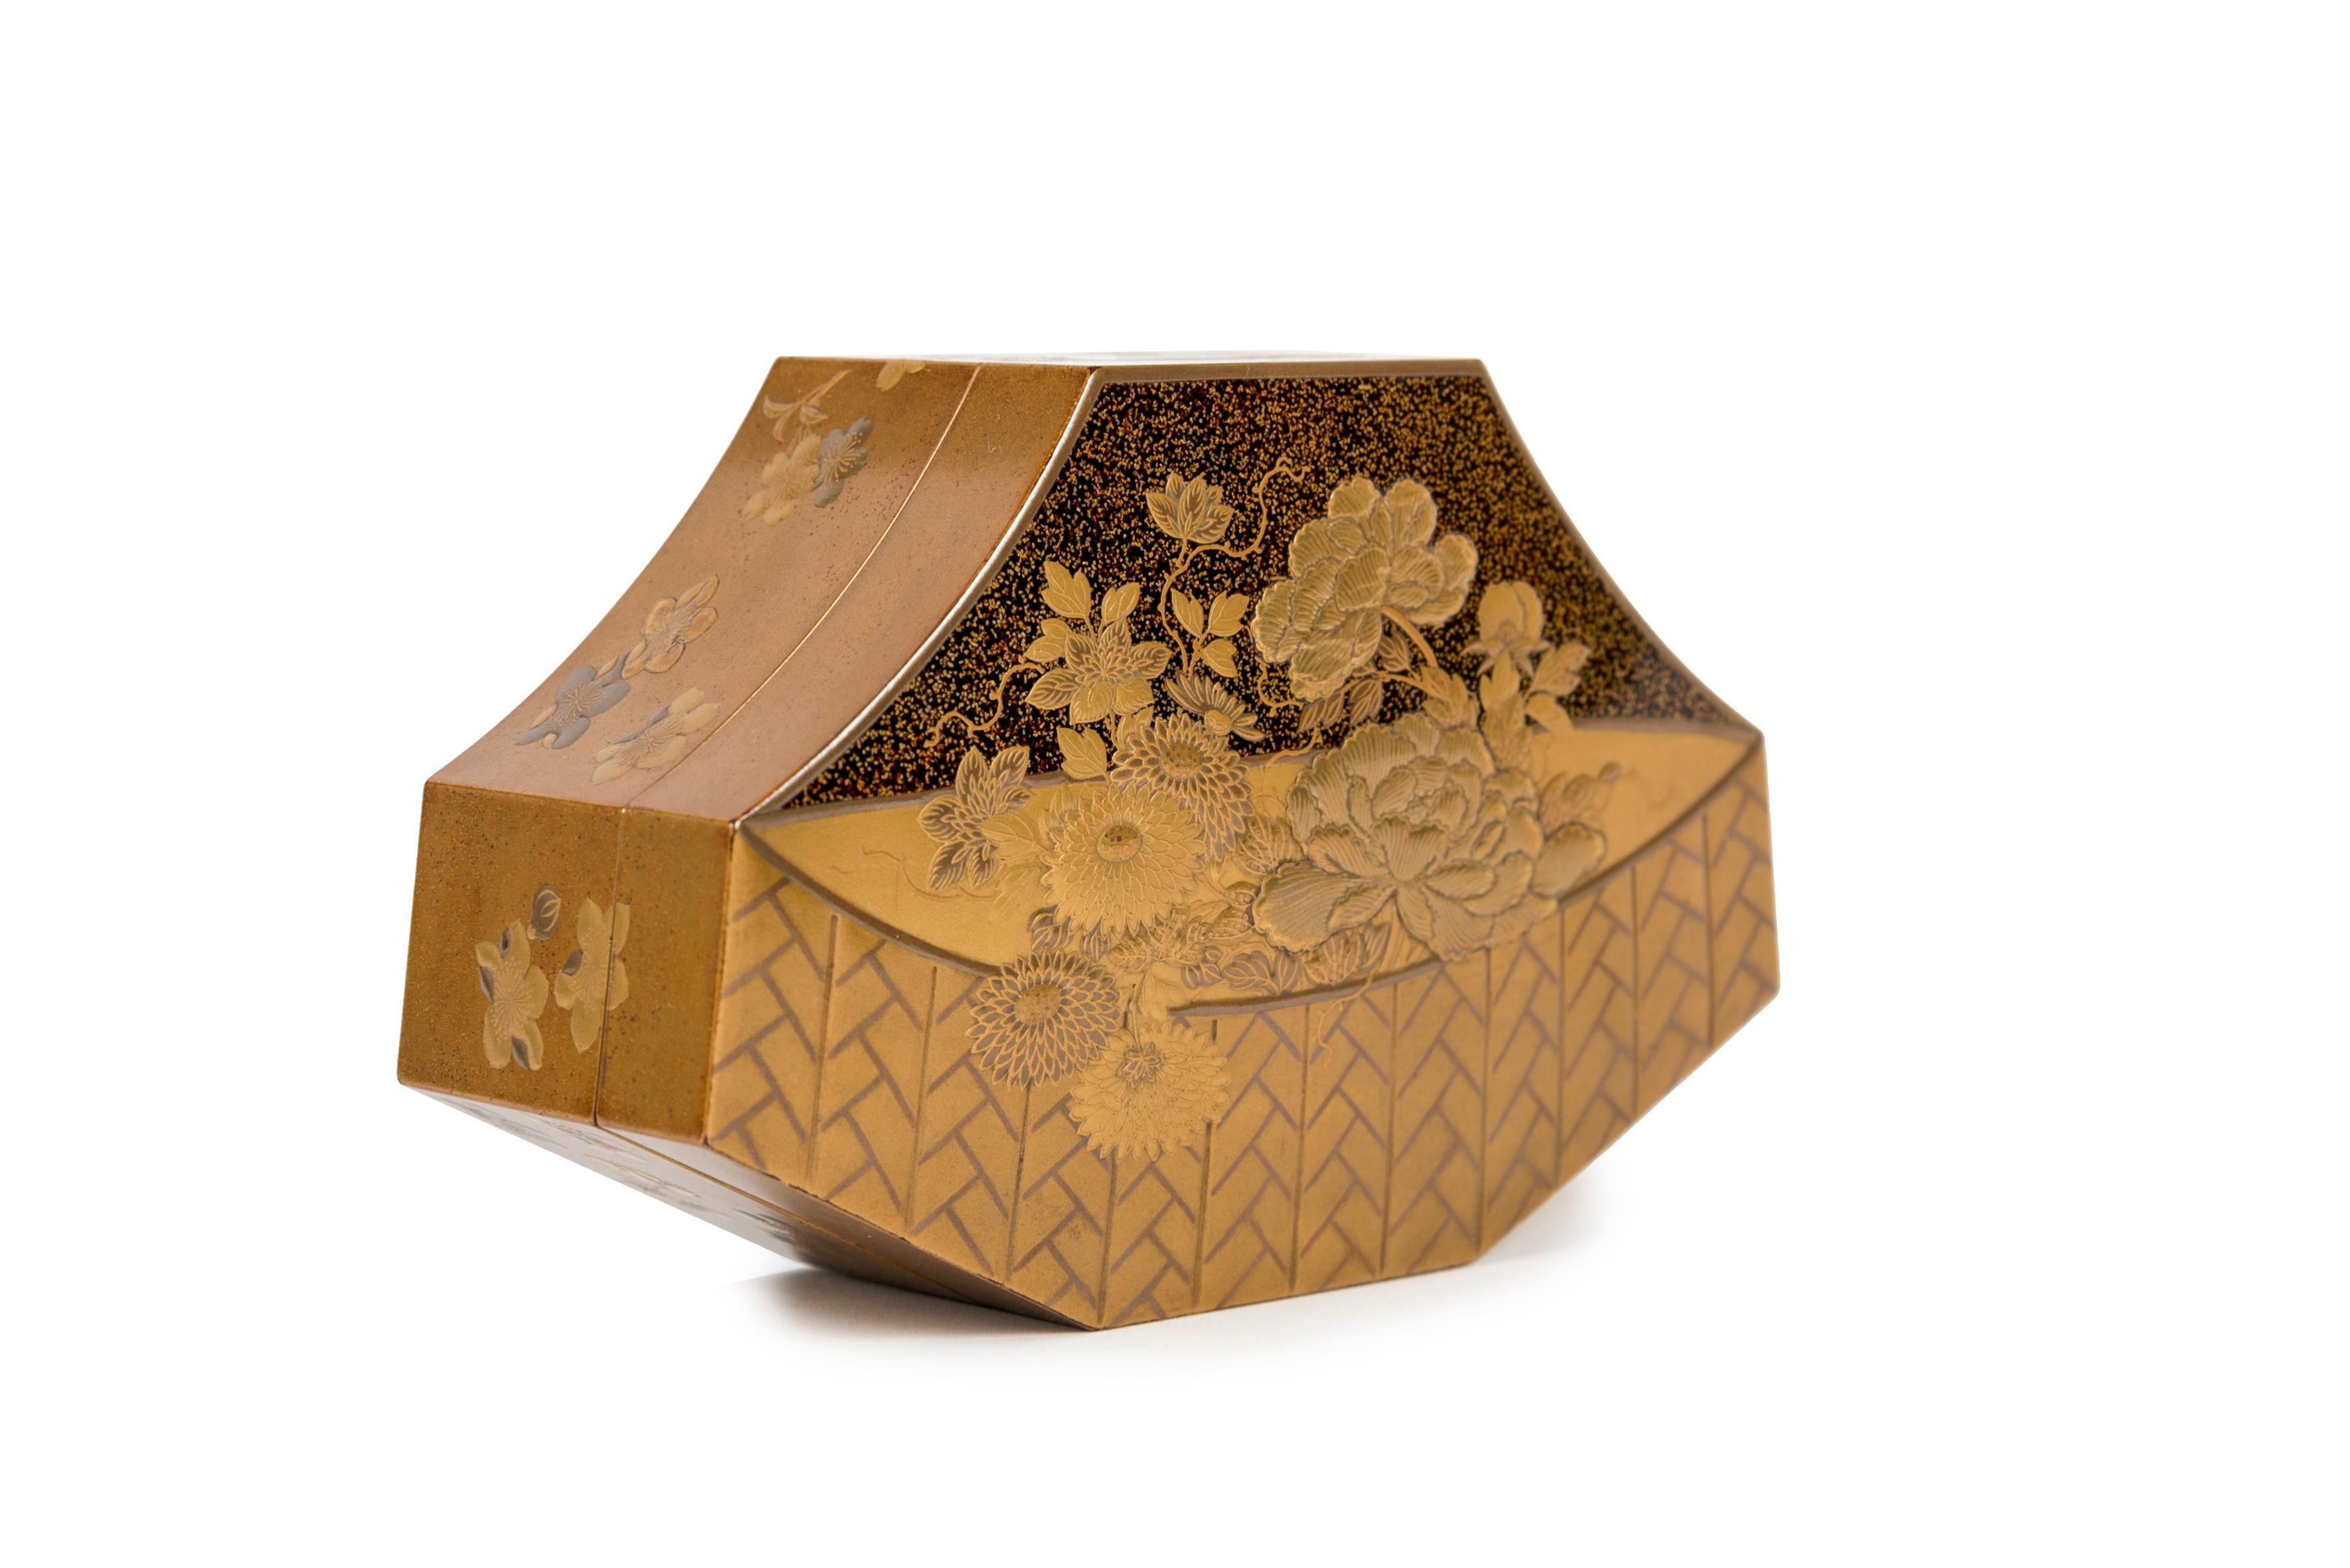 Eight-sided, flared shaped lacquer kobako box, following the decoration on the lid depicting a basket of flowers, composed of peonies and chrysanthemums in gold takamaki-e and hiramaki-e lacquer on a nashi-ji background. The edge is decorated with